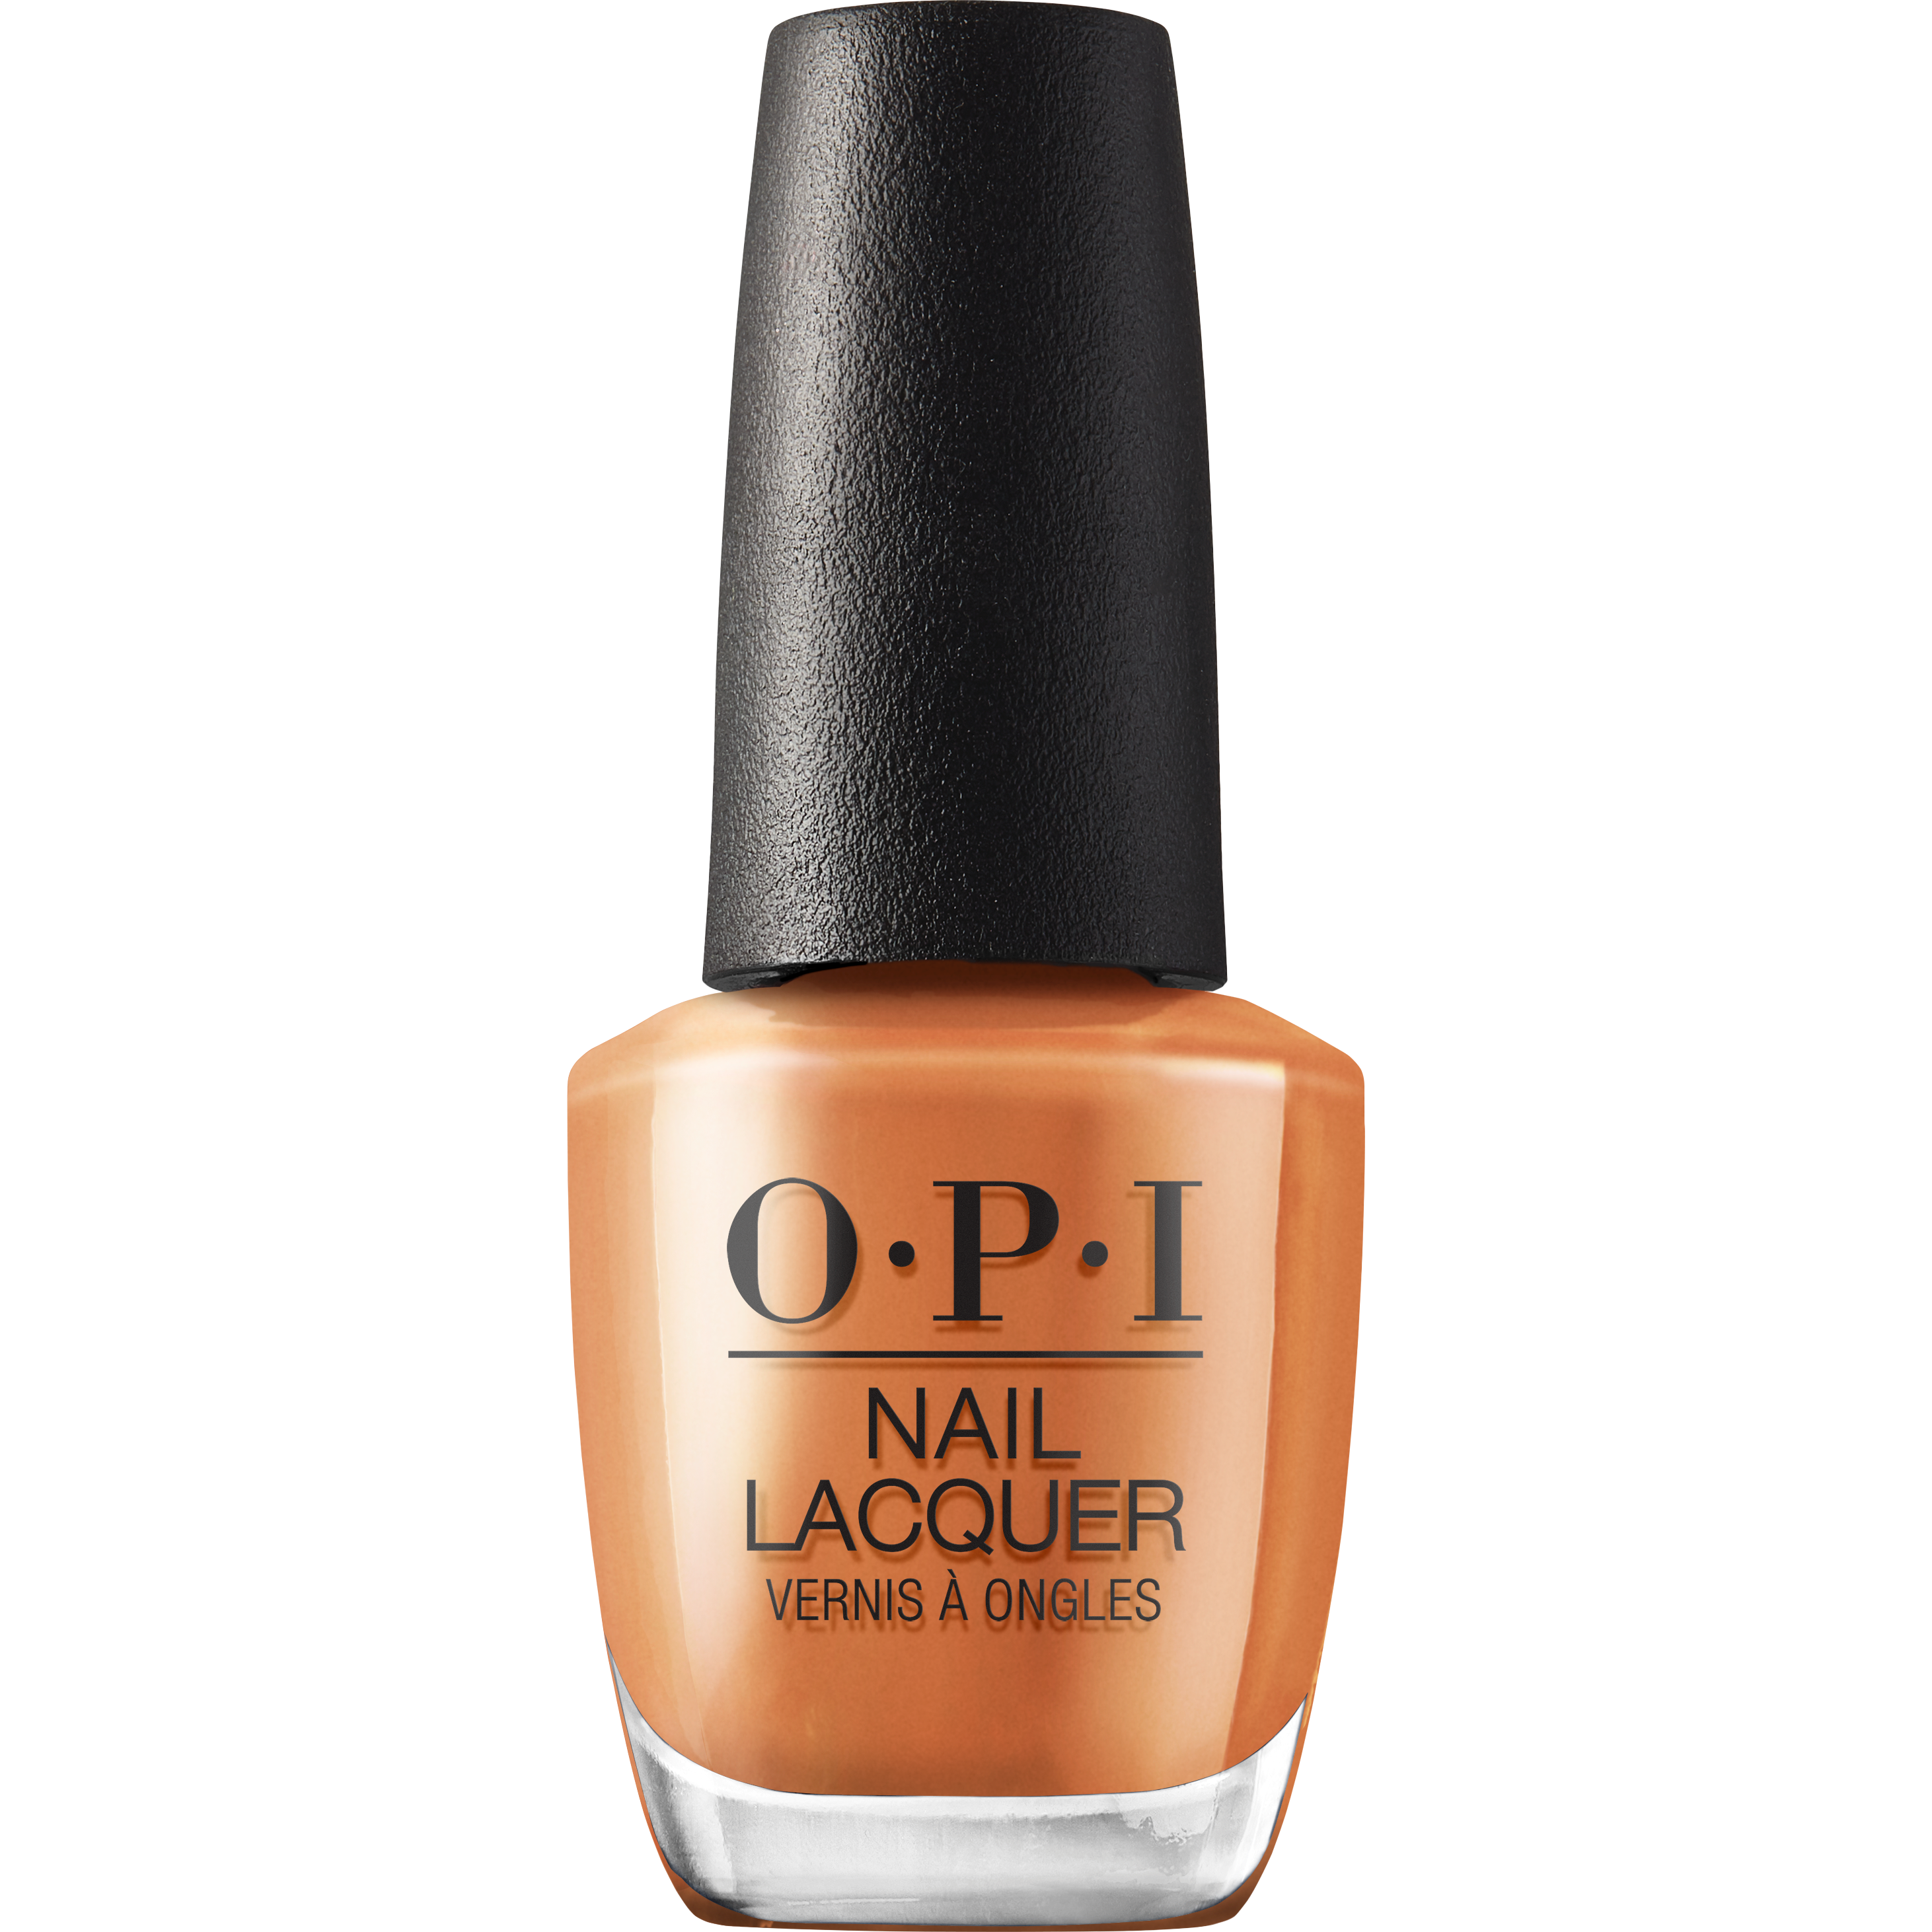 OPI Nail Lacquer Muse of Milan Nail Polish Have Your Panettone an